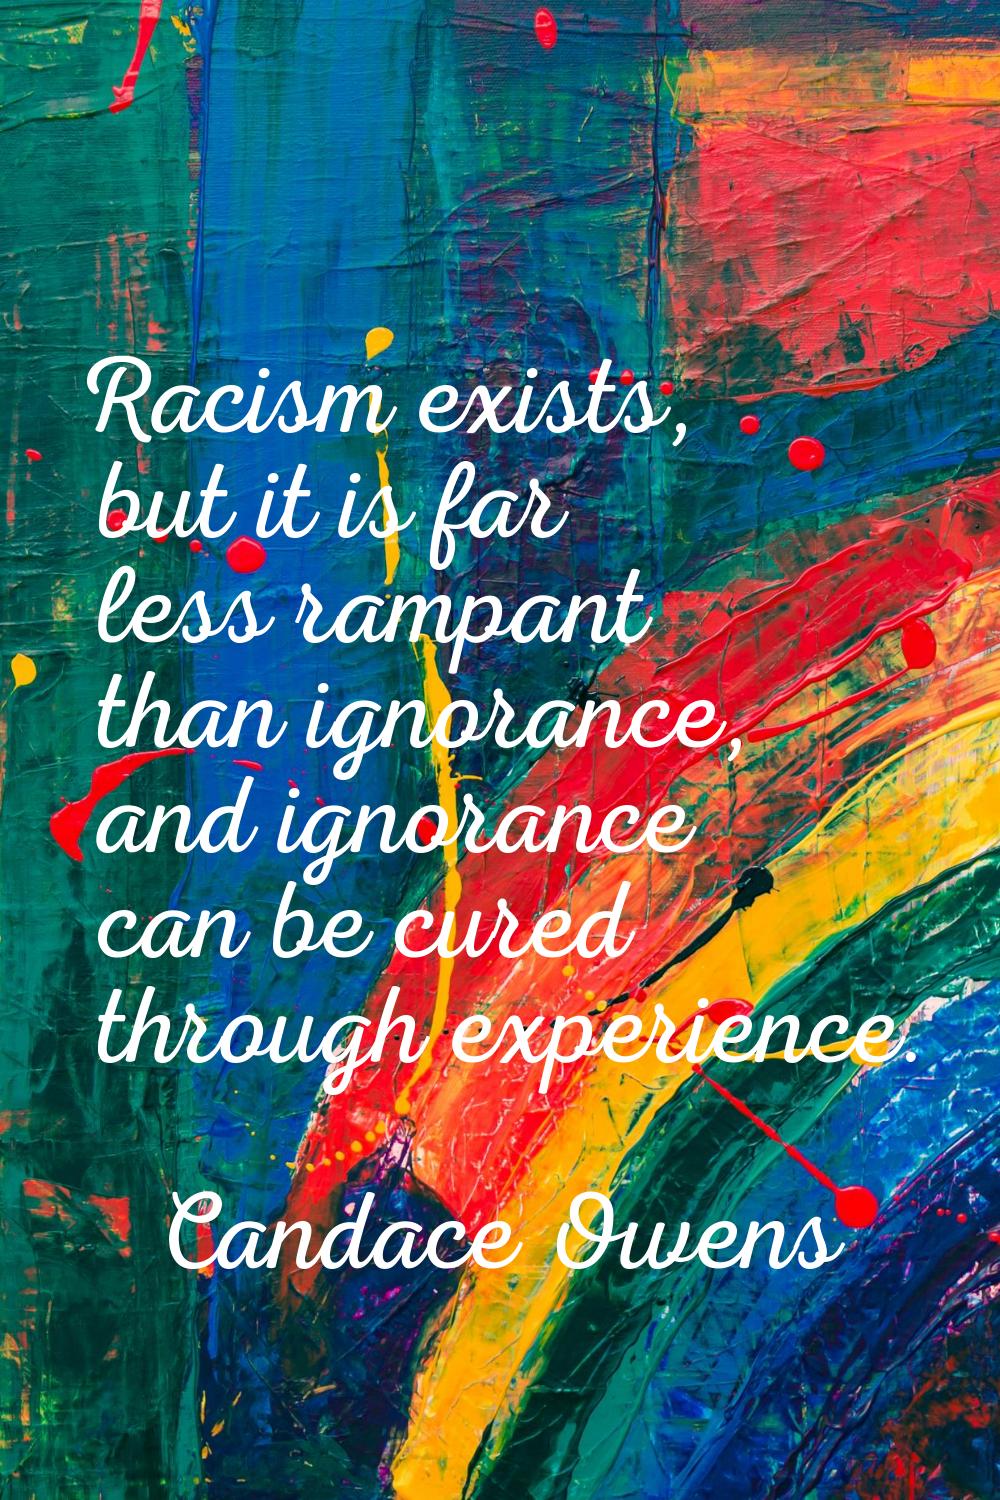 Racism exists, but it is far less rampant than ignorance, and ignorance can be cured through experi